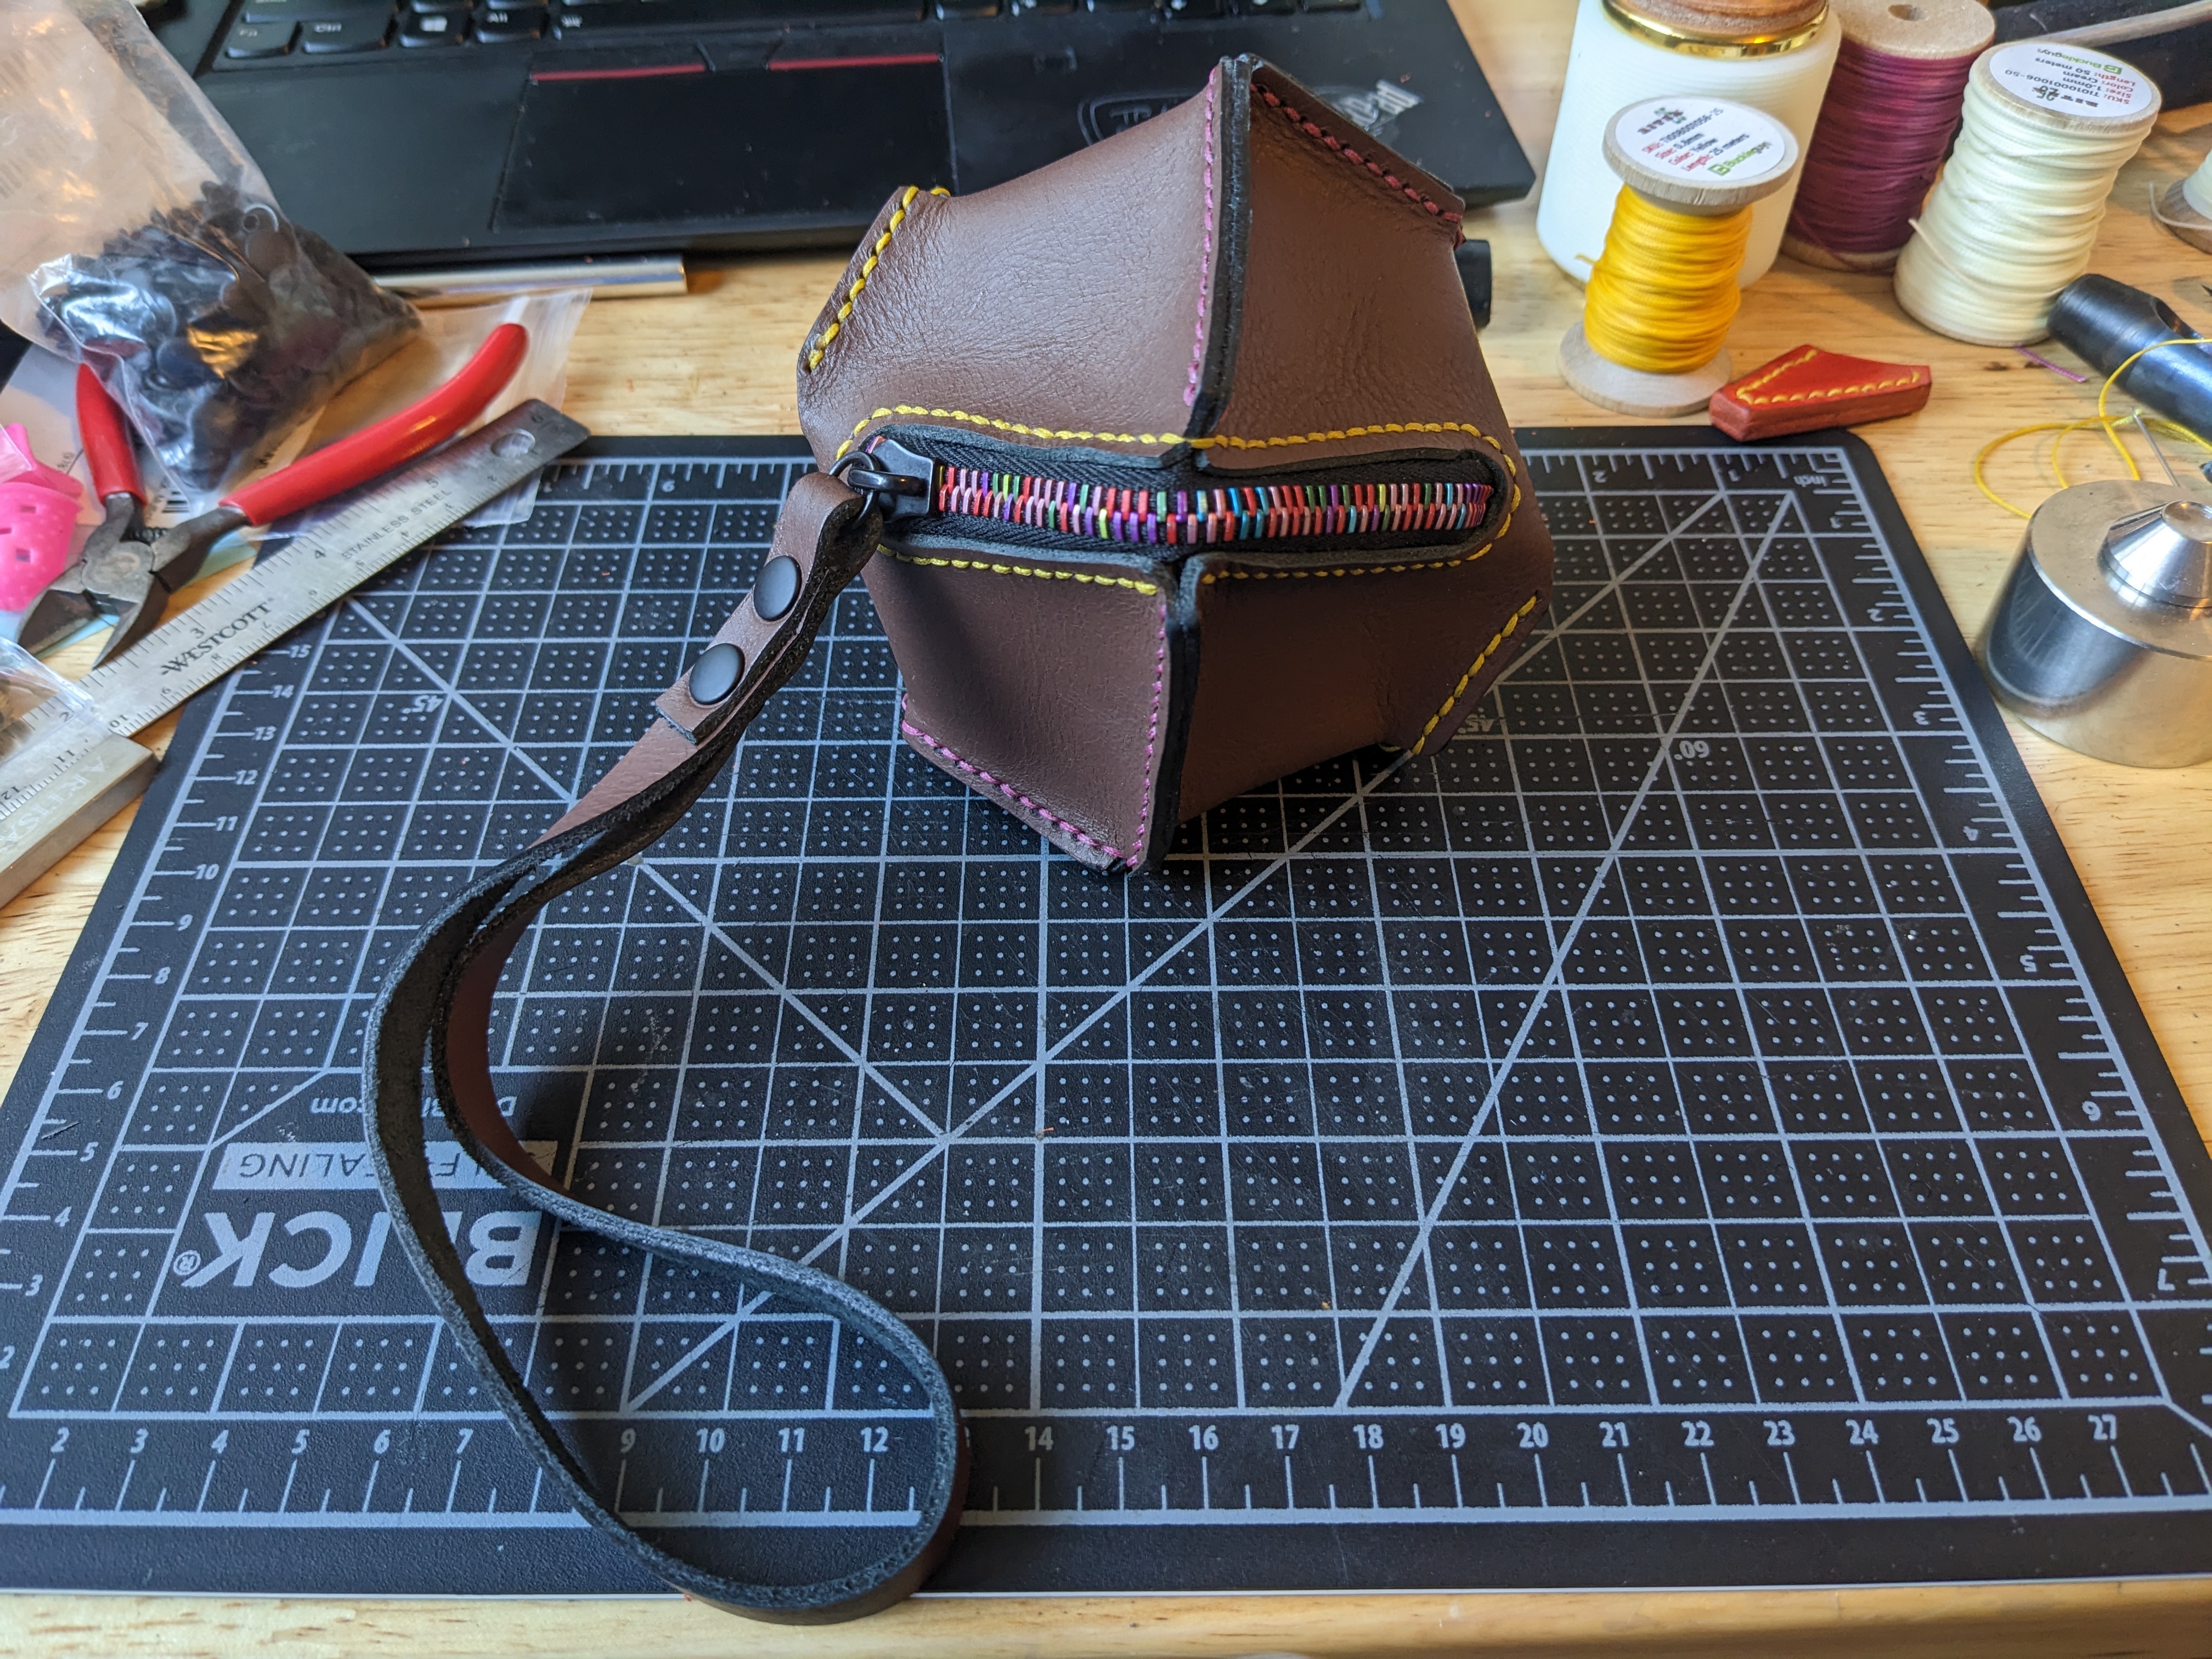 A leather pouch shaped a bit like a d10 but with eight sides. It has a rainbow zippered opening and a wristlet strap.